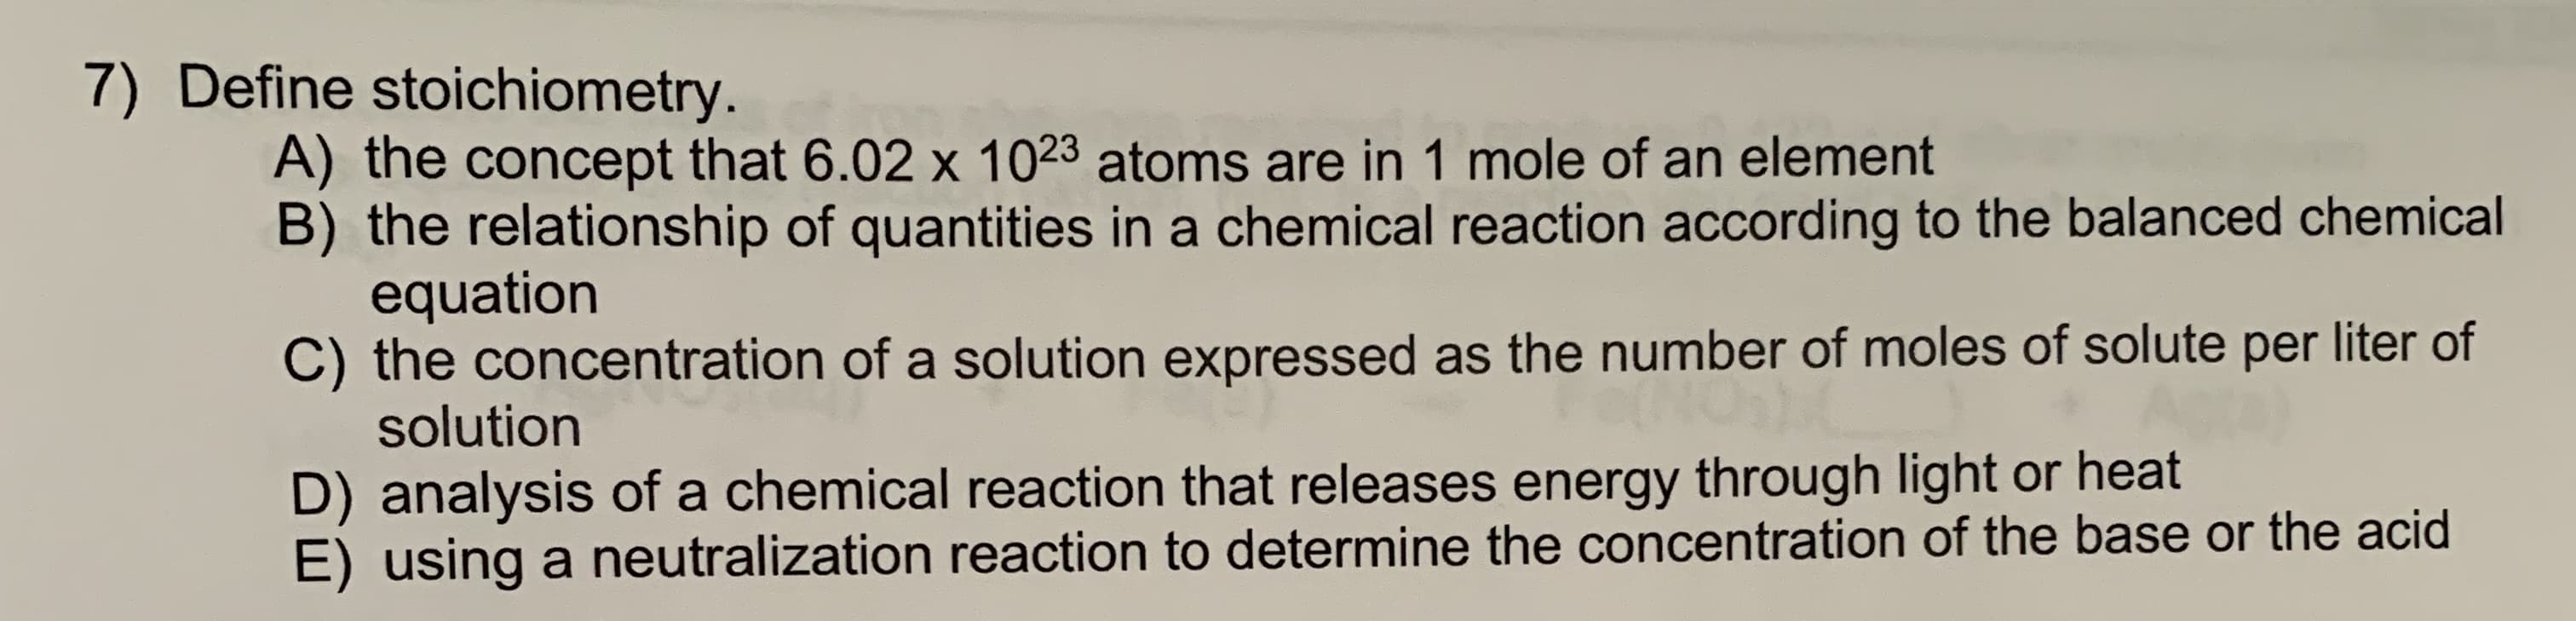 7) Define stoichiometry.
A) the concept that 6.02 x 1023 atoms are in 1 mole of an element
B) the relationship of quantities in a chemical reaction according to the balanced chemical
equation
C) the concentration of a solution expressed as the number of moles of solute per liter of
solution
D) analysis of a chemical reaction that releases energy through light or heat
E) using a neutralization reaction to determine the concentration of the base or the acid
